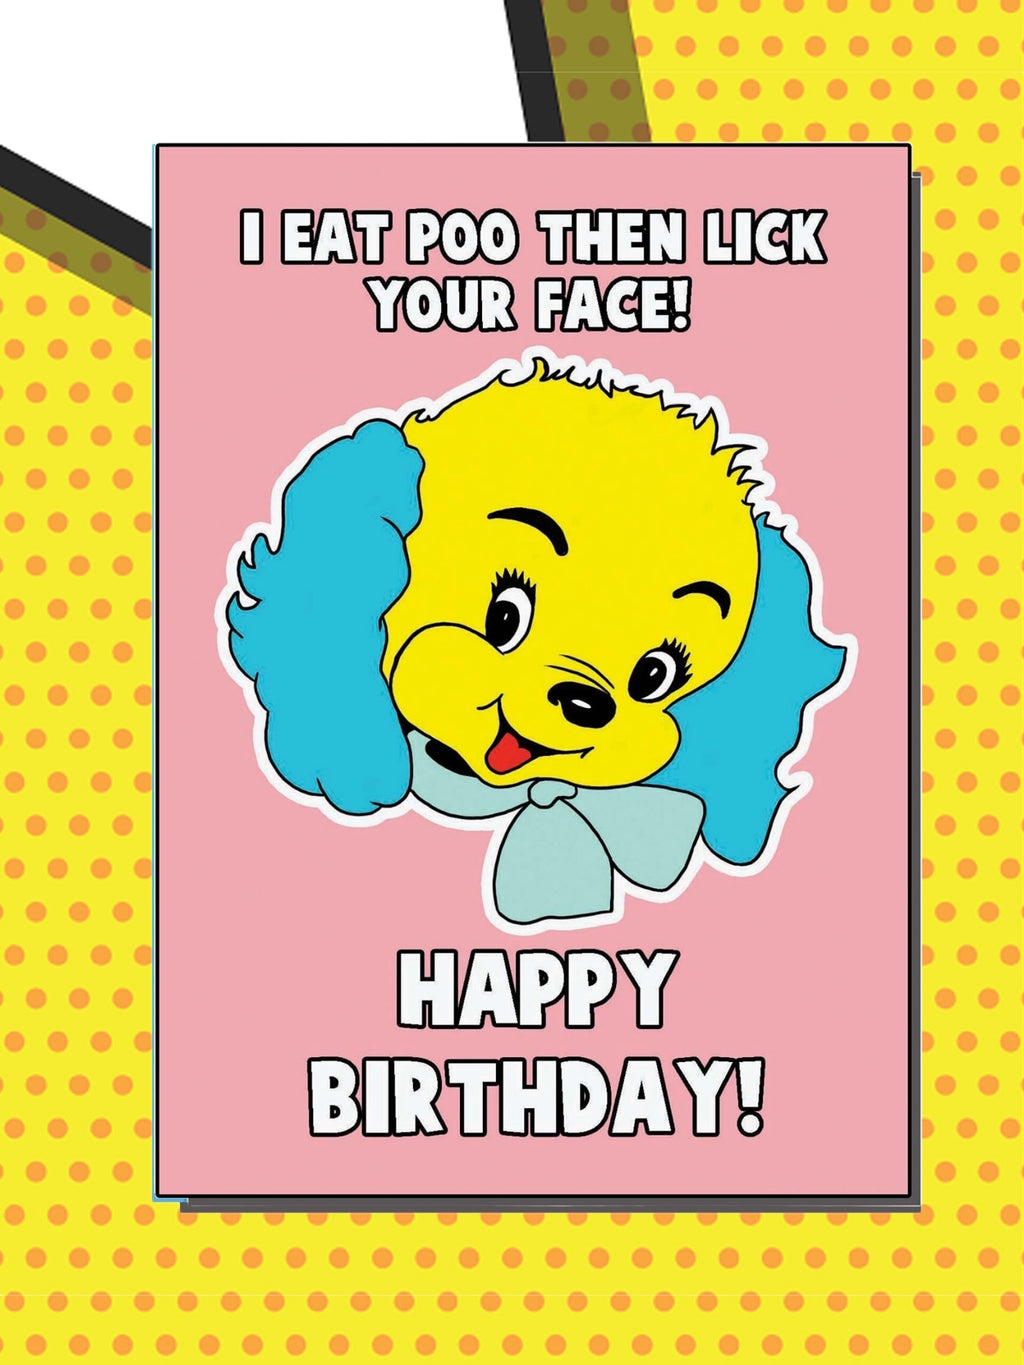 Greeting Card - Eat Poo and Lick Your Face